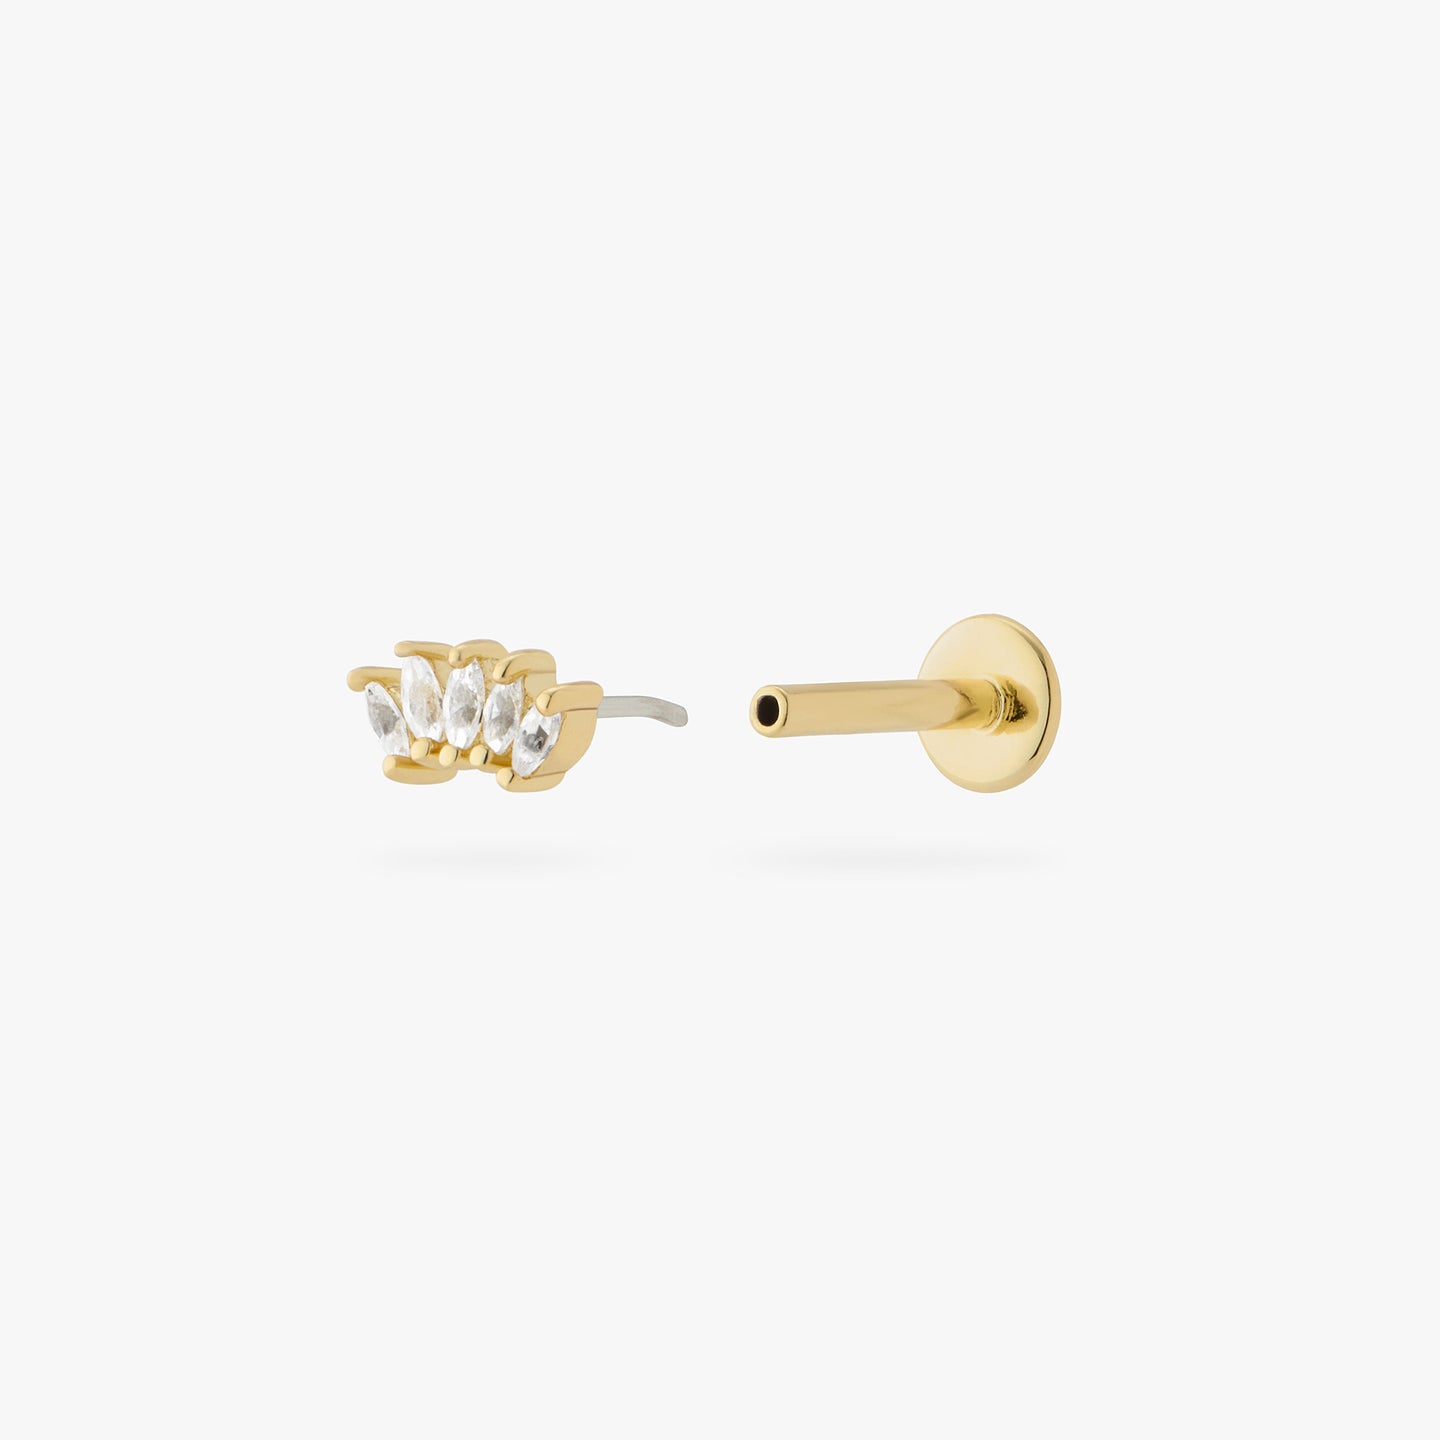 a gold flatback stud with a small crown-shape of clear marquise studs color:null|gold/clear|6mm / gold/clear|8mm / gold/clear|10mm / gold/clear|6mm / gold|8mm / gold|10mm / gold